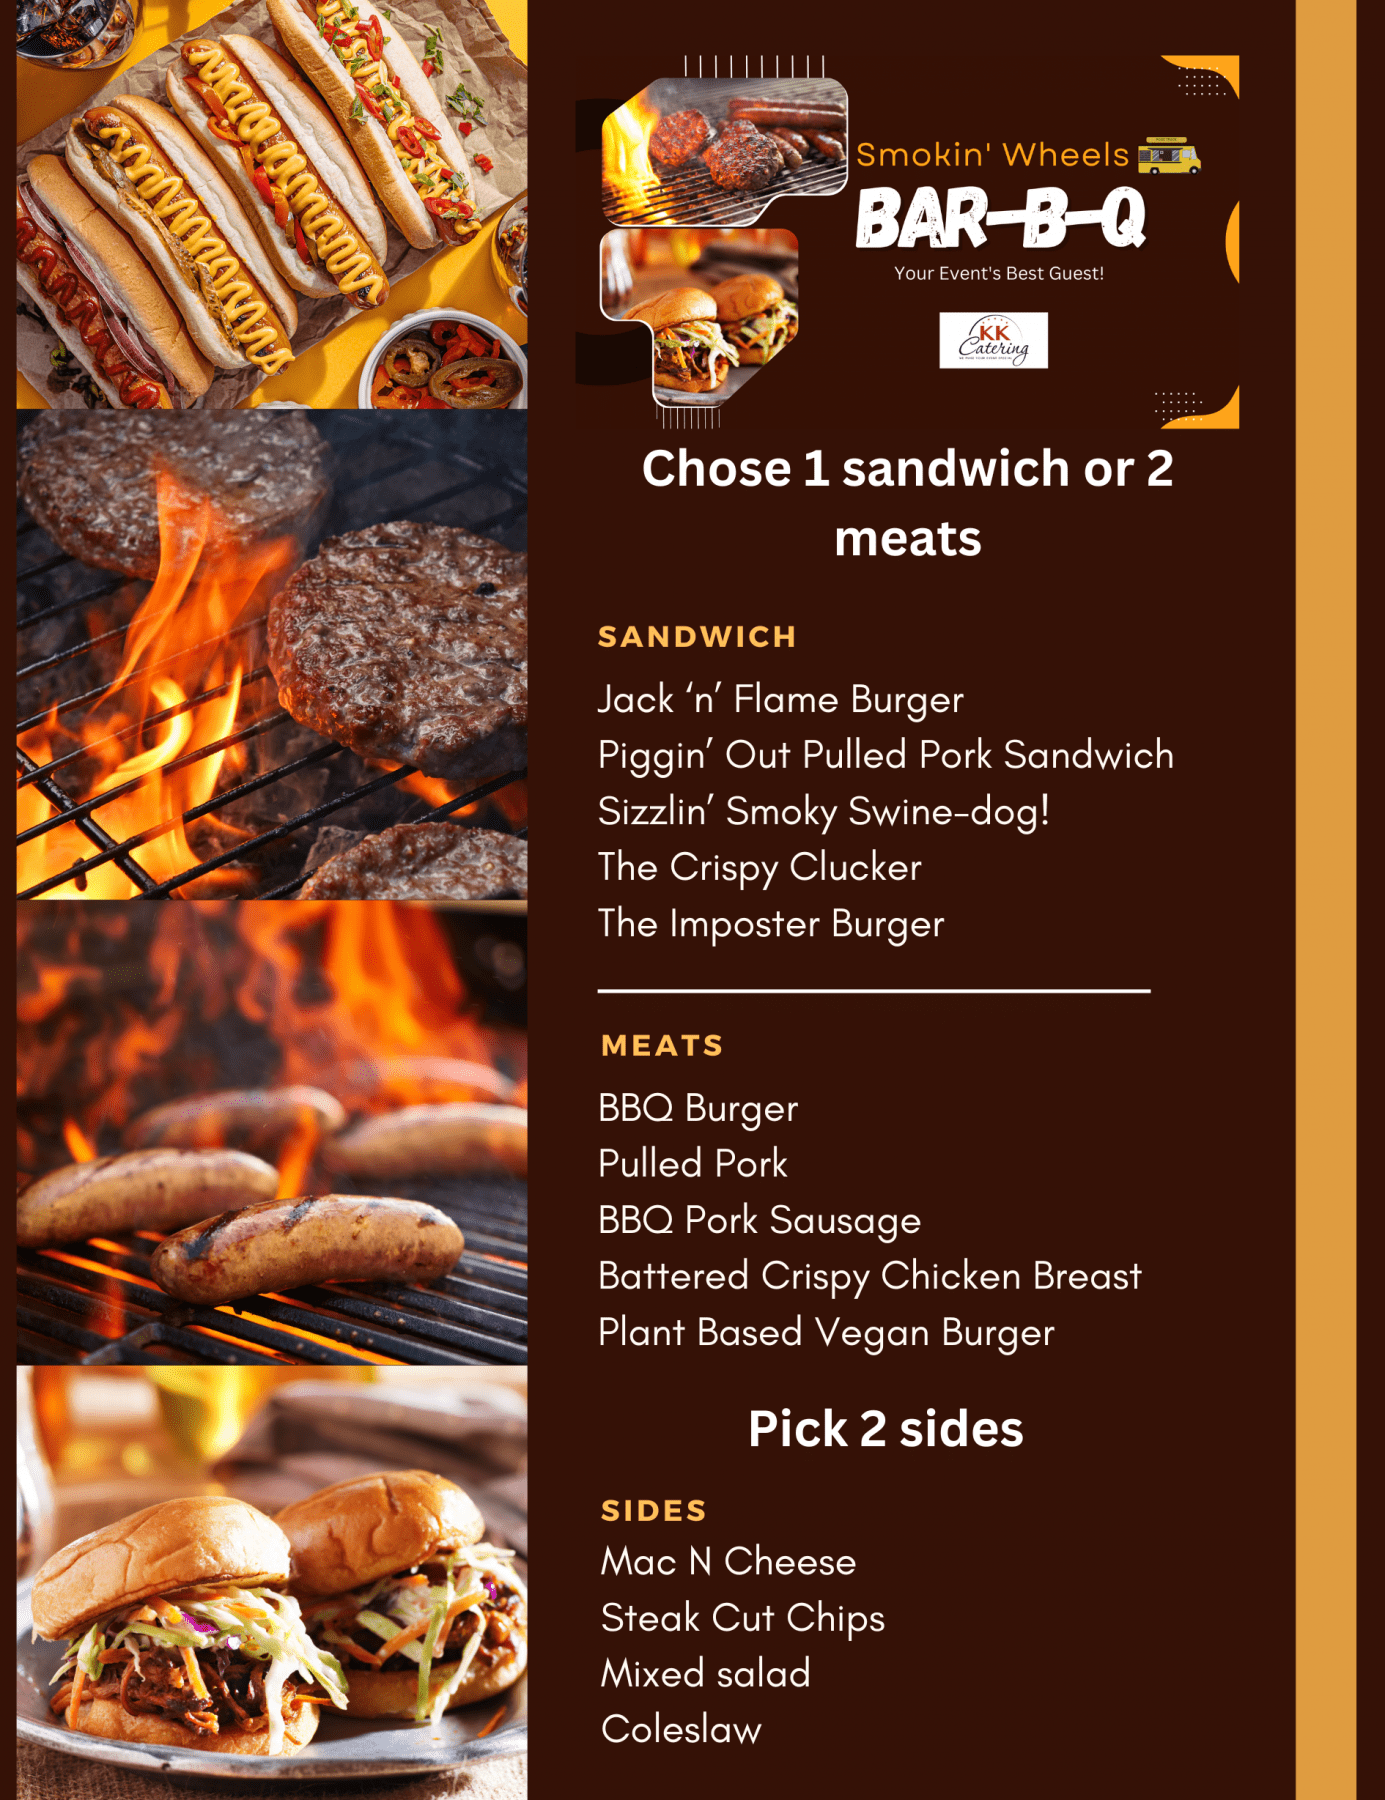 bbq catering menu from smokin wheels by kk catering